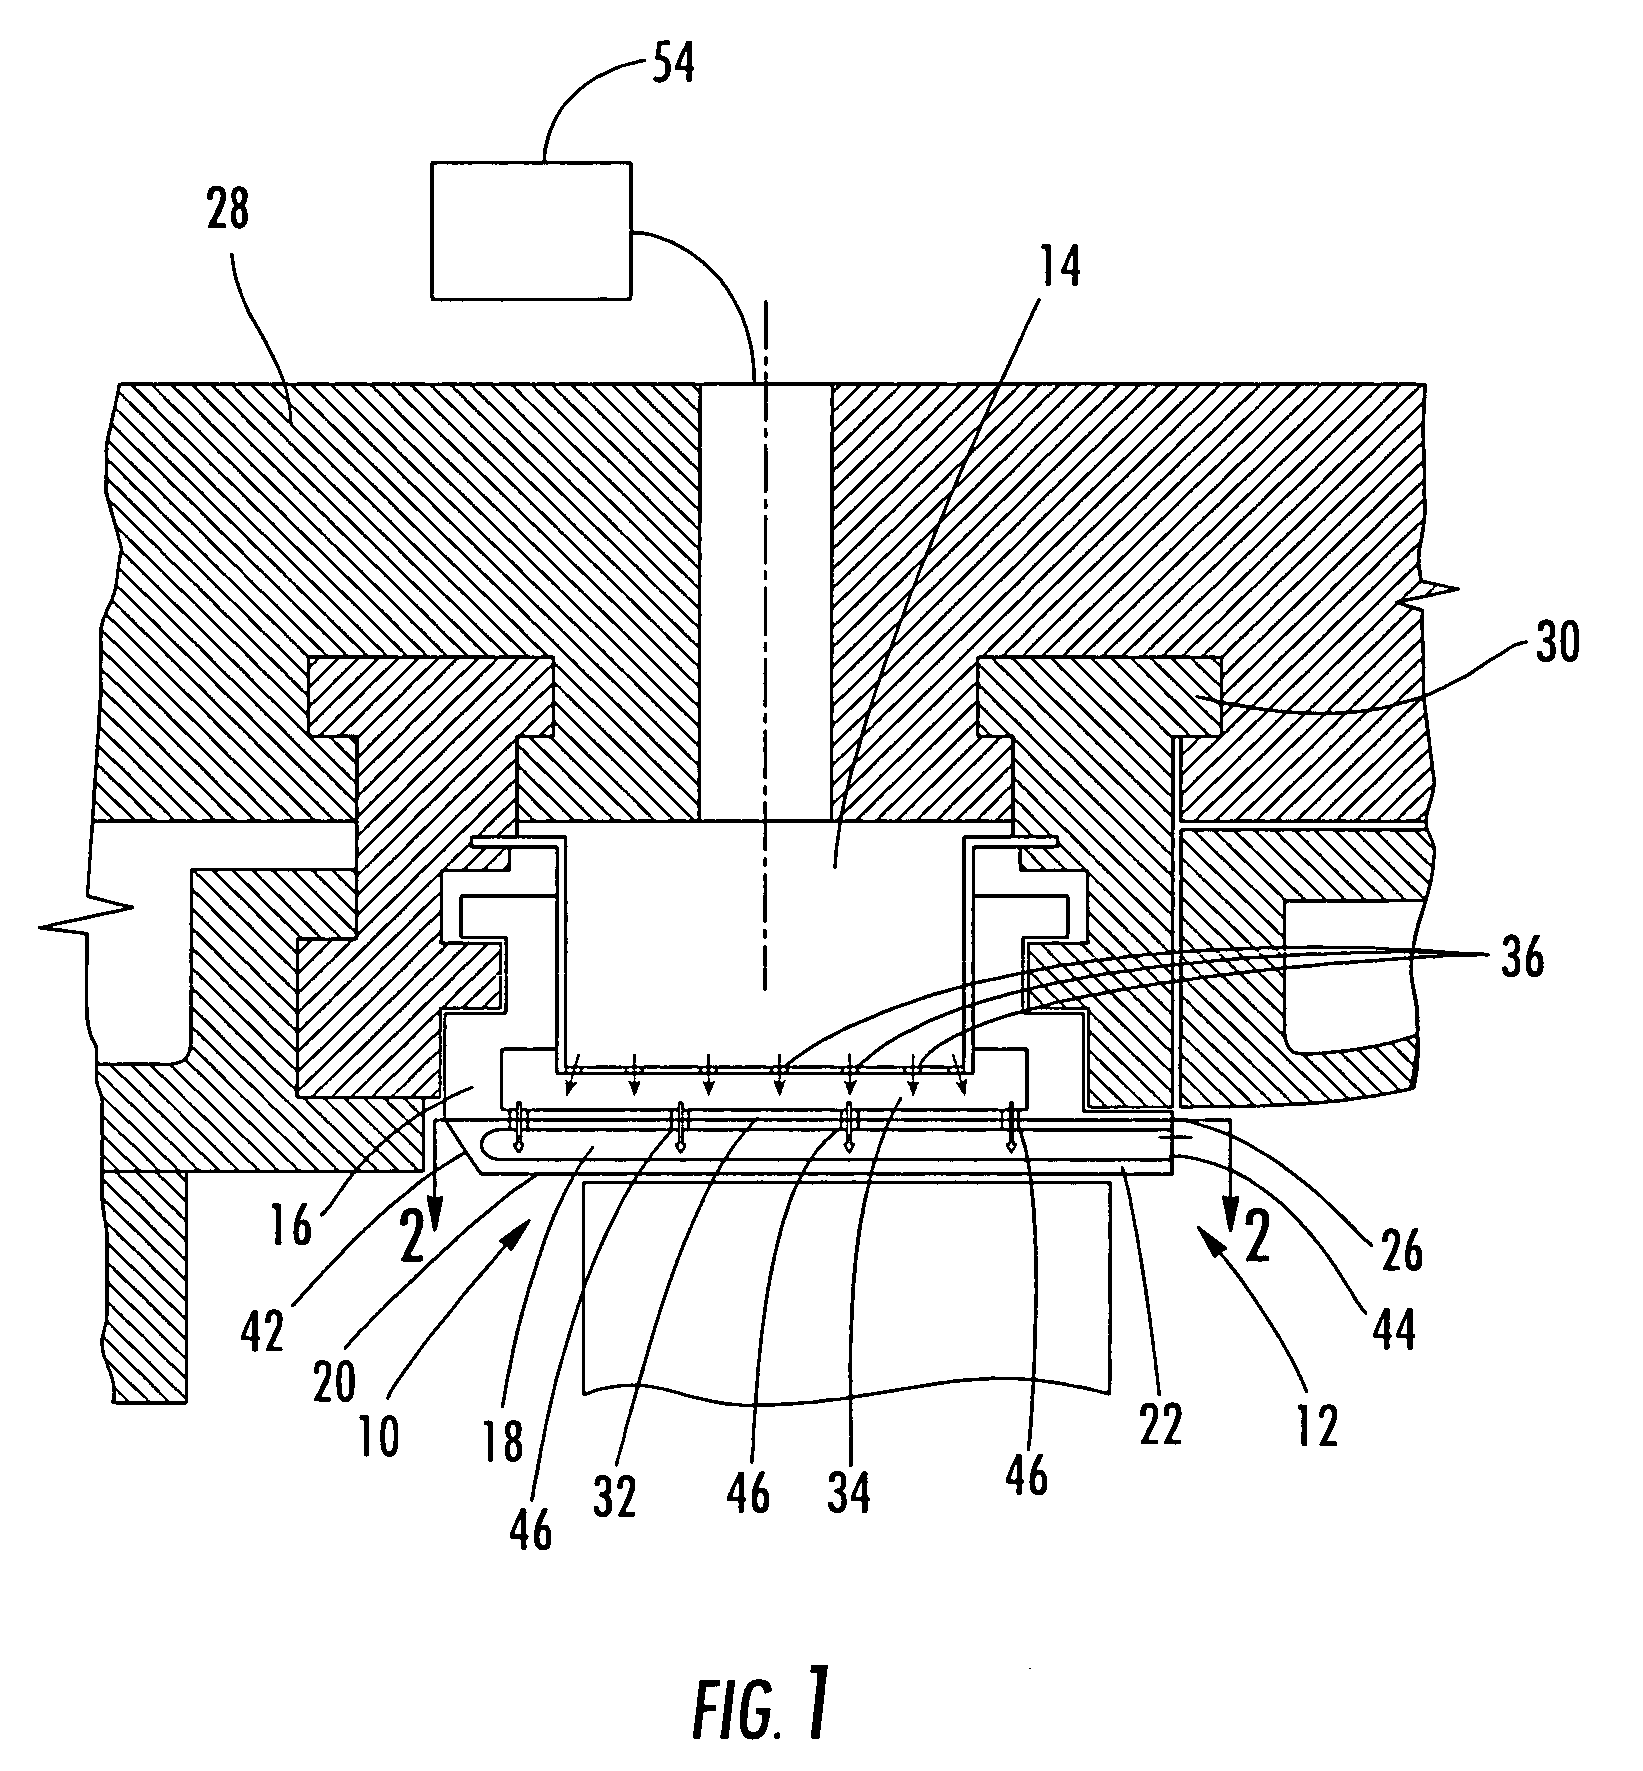 Vortex cooled turbine blade outer air seal for a turbine engine